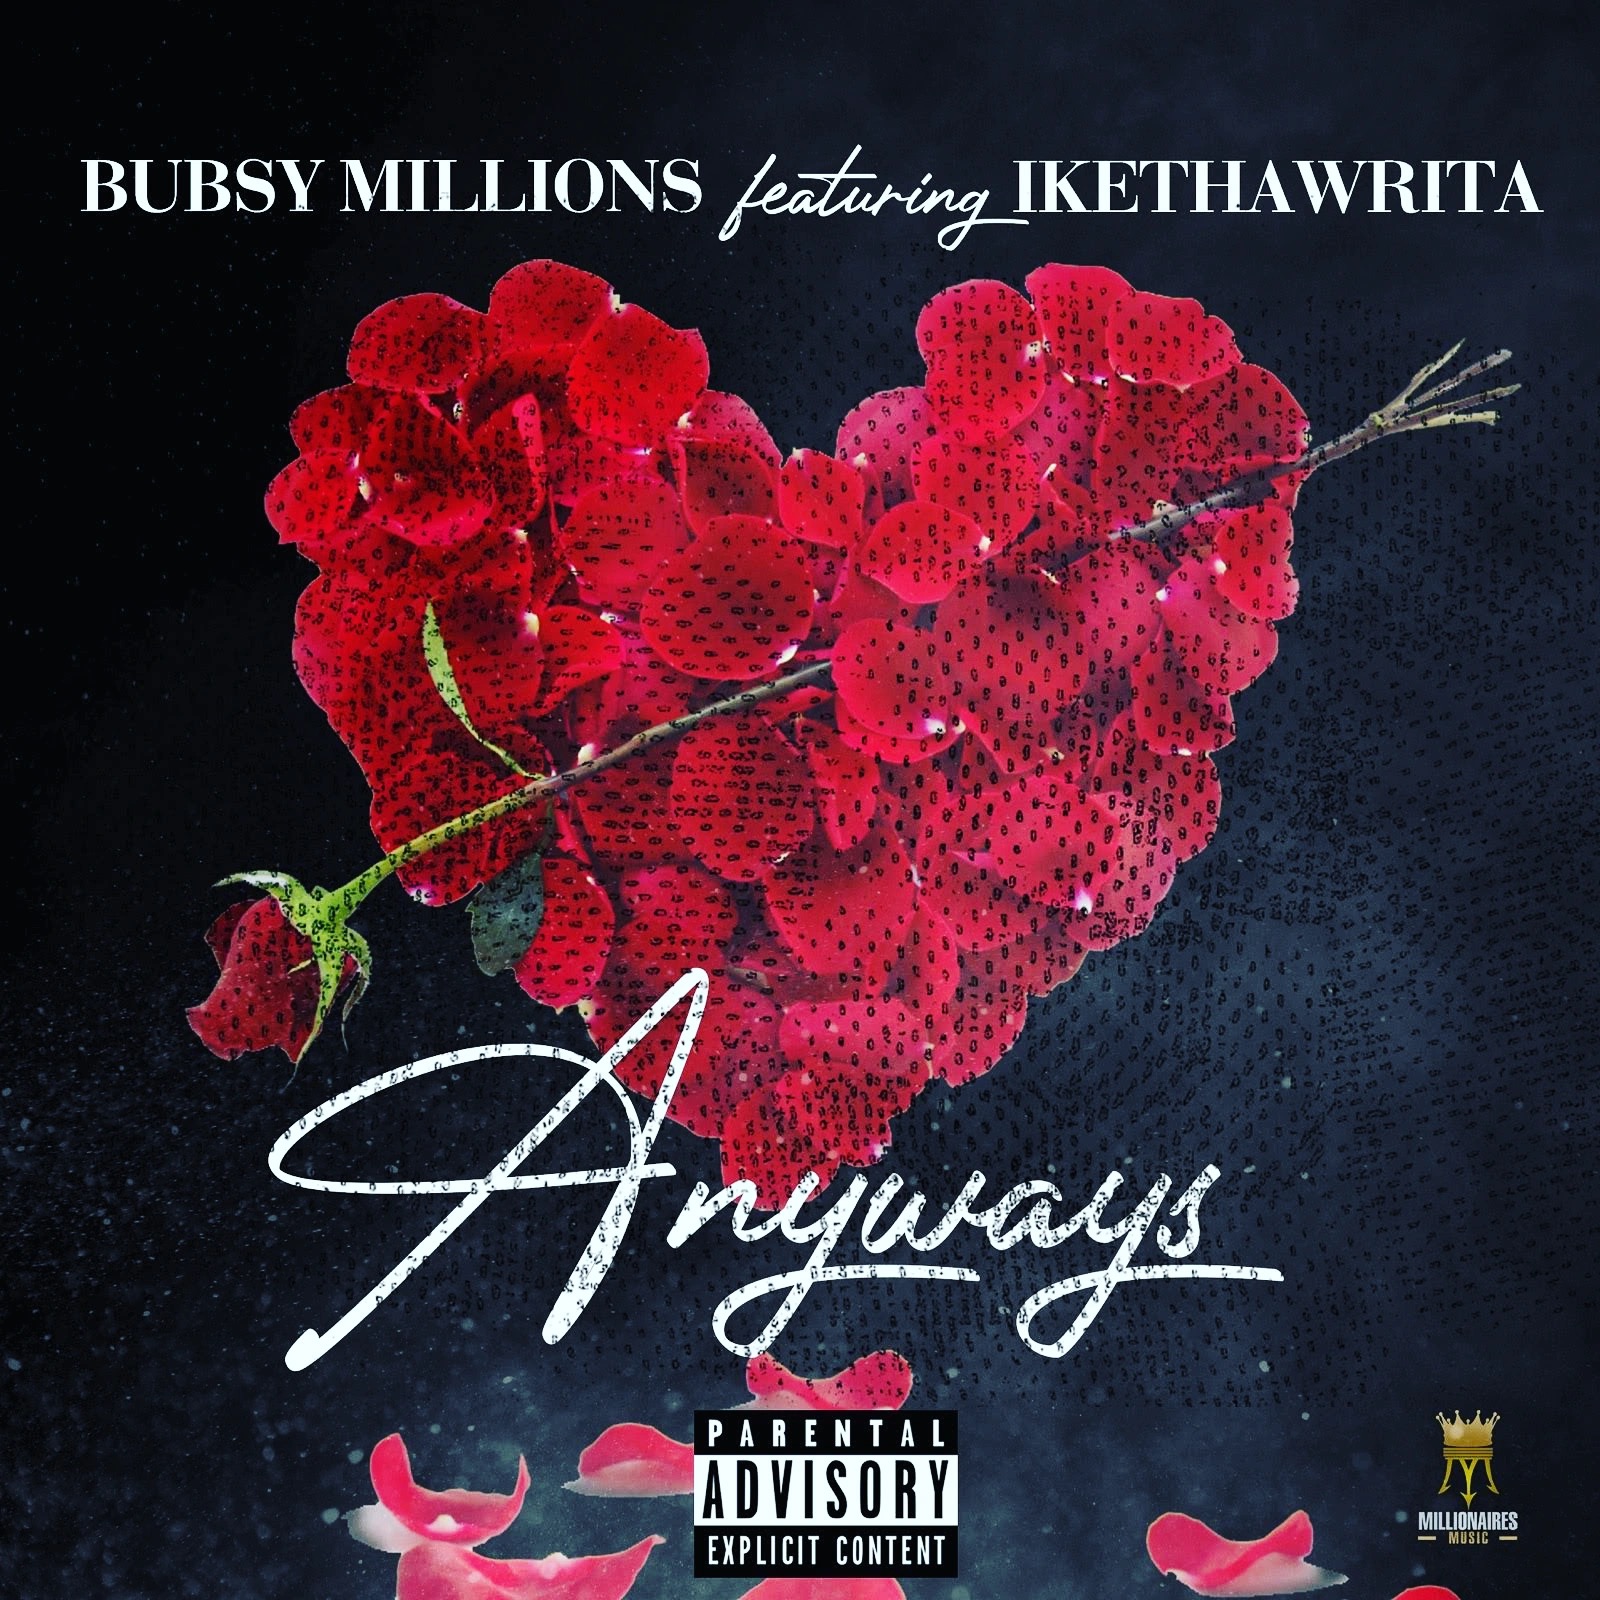 New Music from Bubsy Millions featuring Ike Tha Writa Called  “Anyways” @bubsymillions